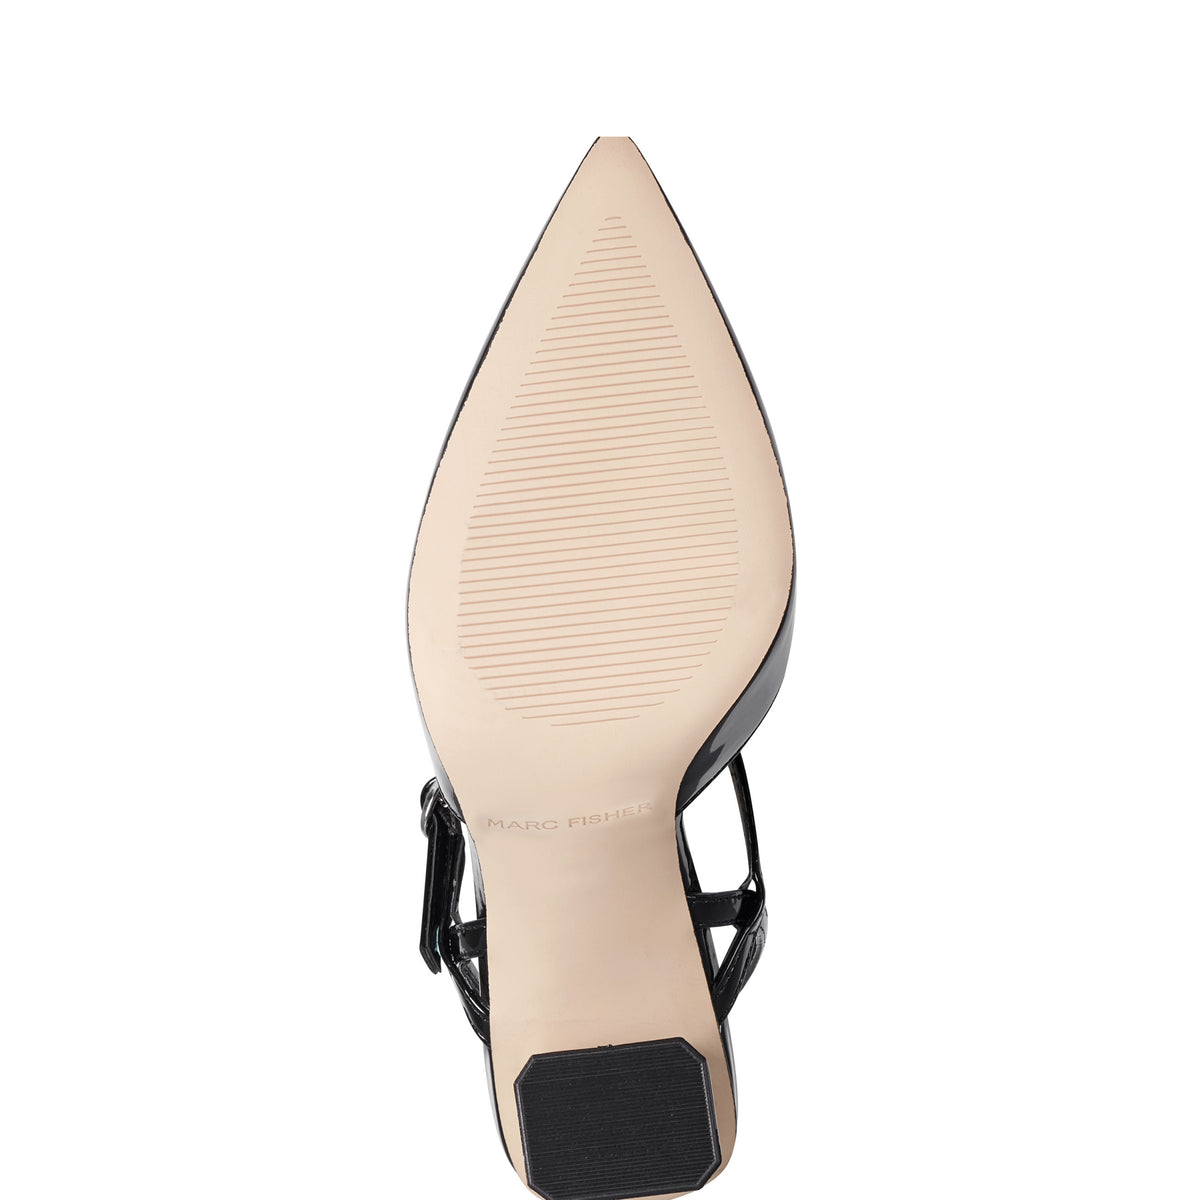 Doster Pointy Toe Slingback